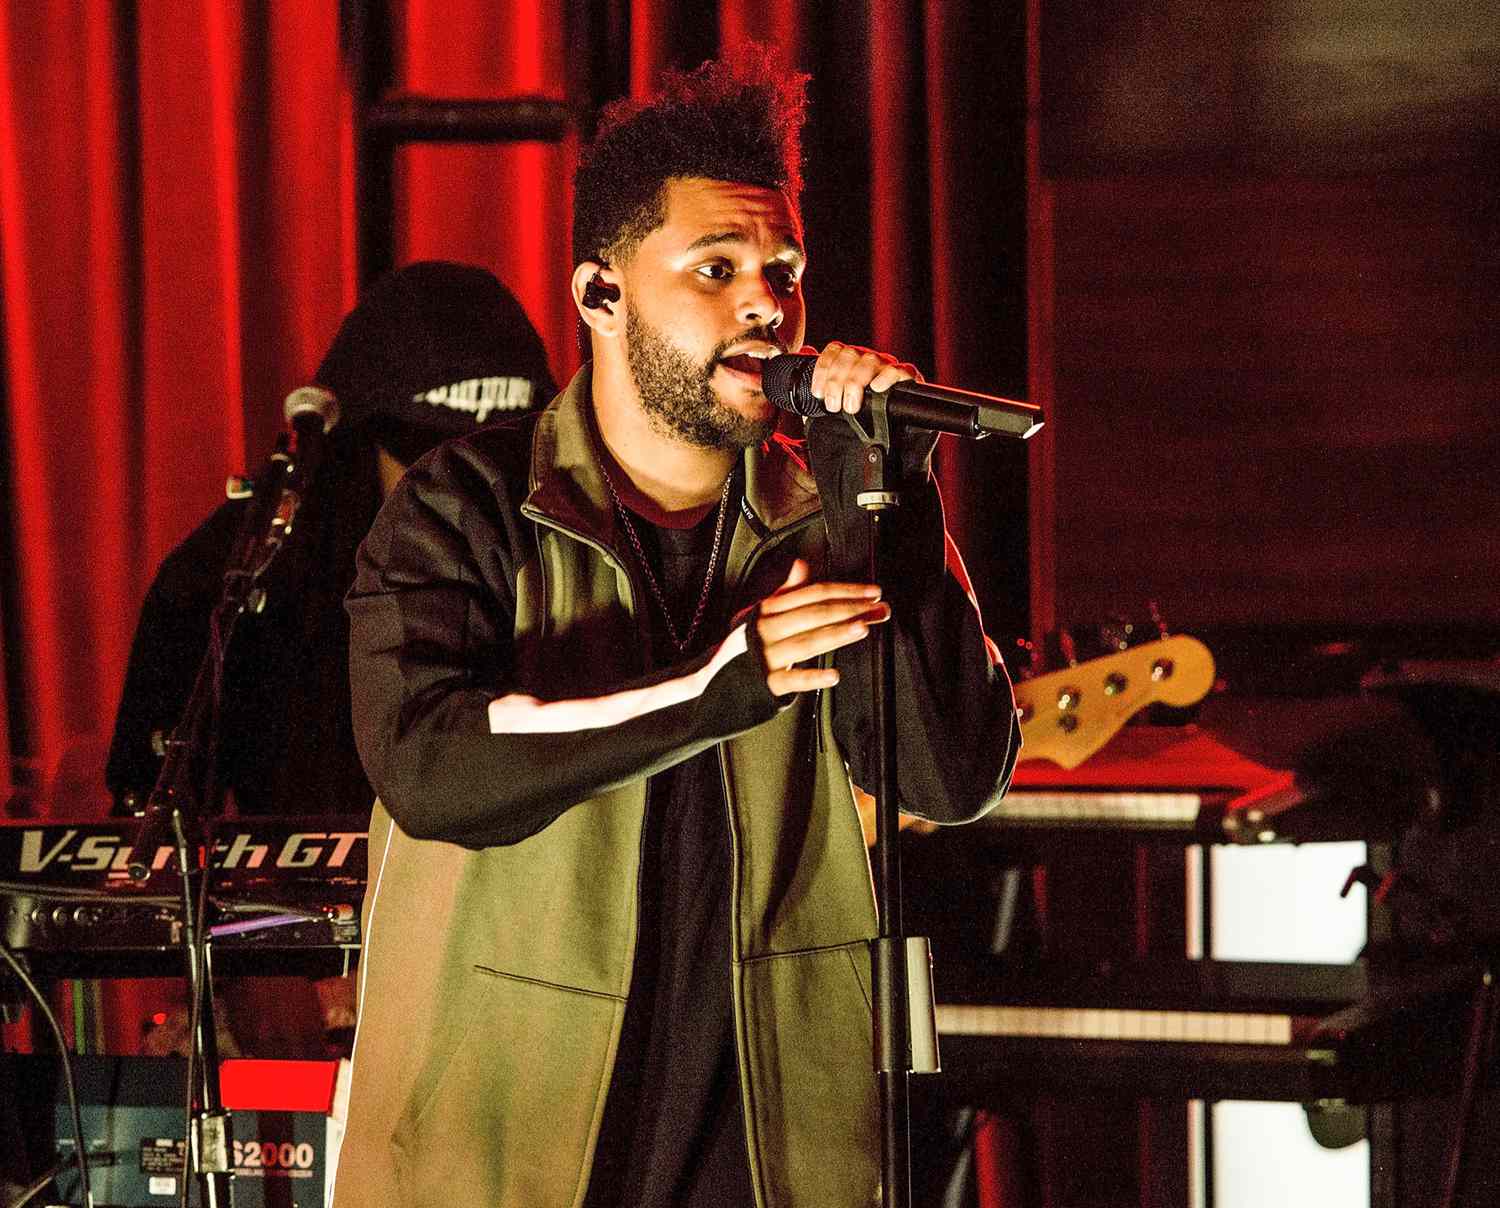 A Special Performance By The Weeknd